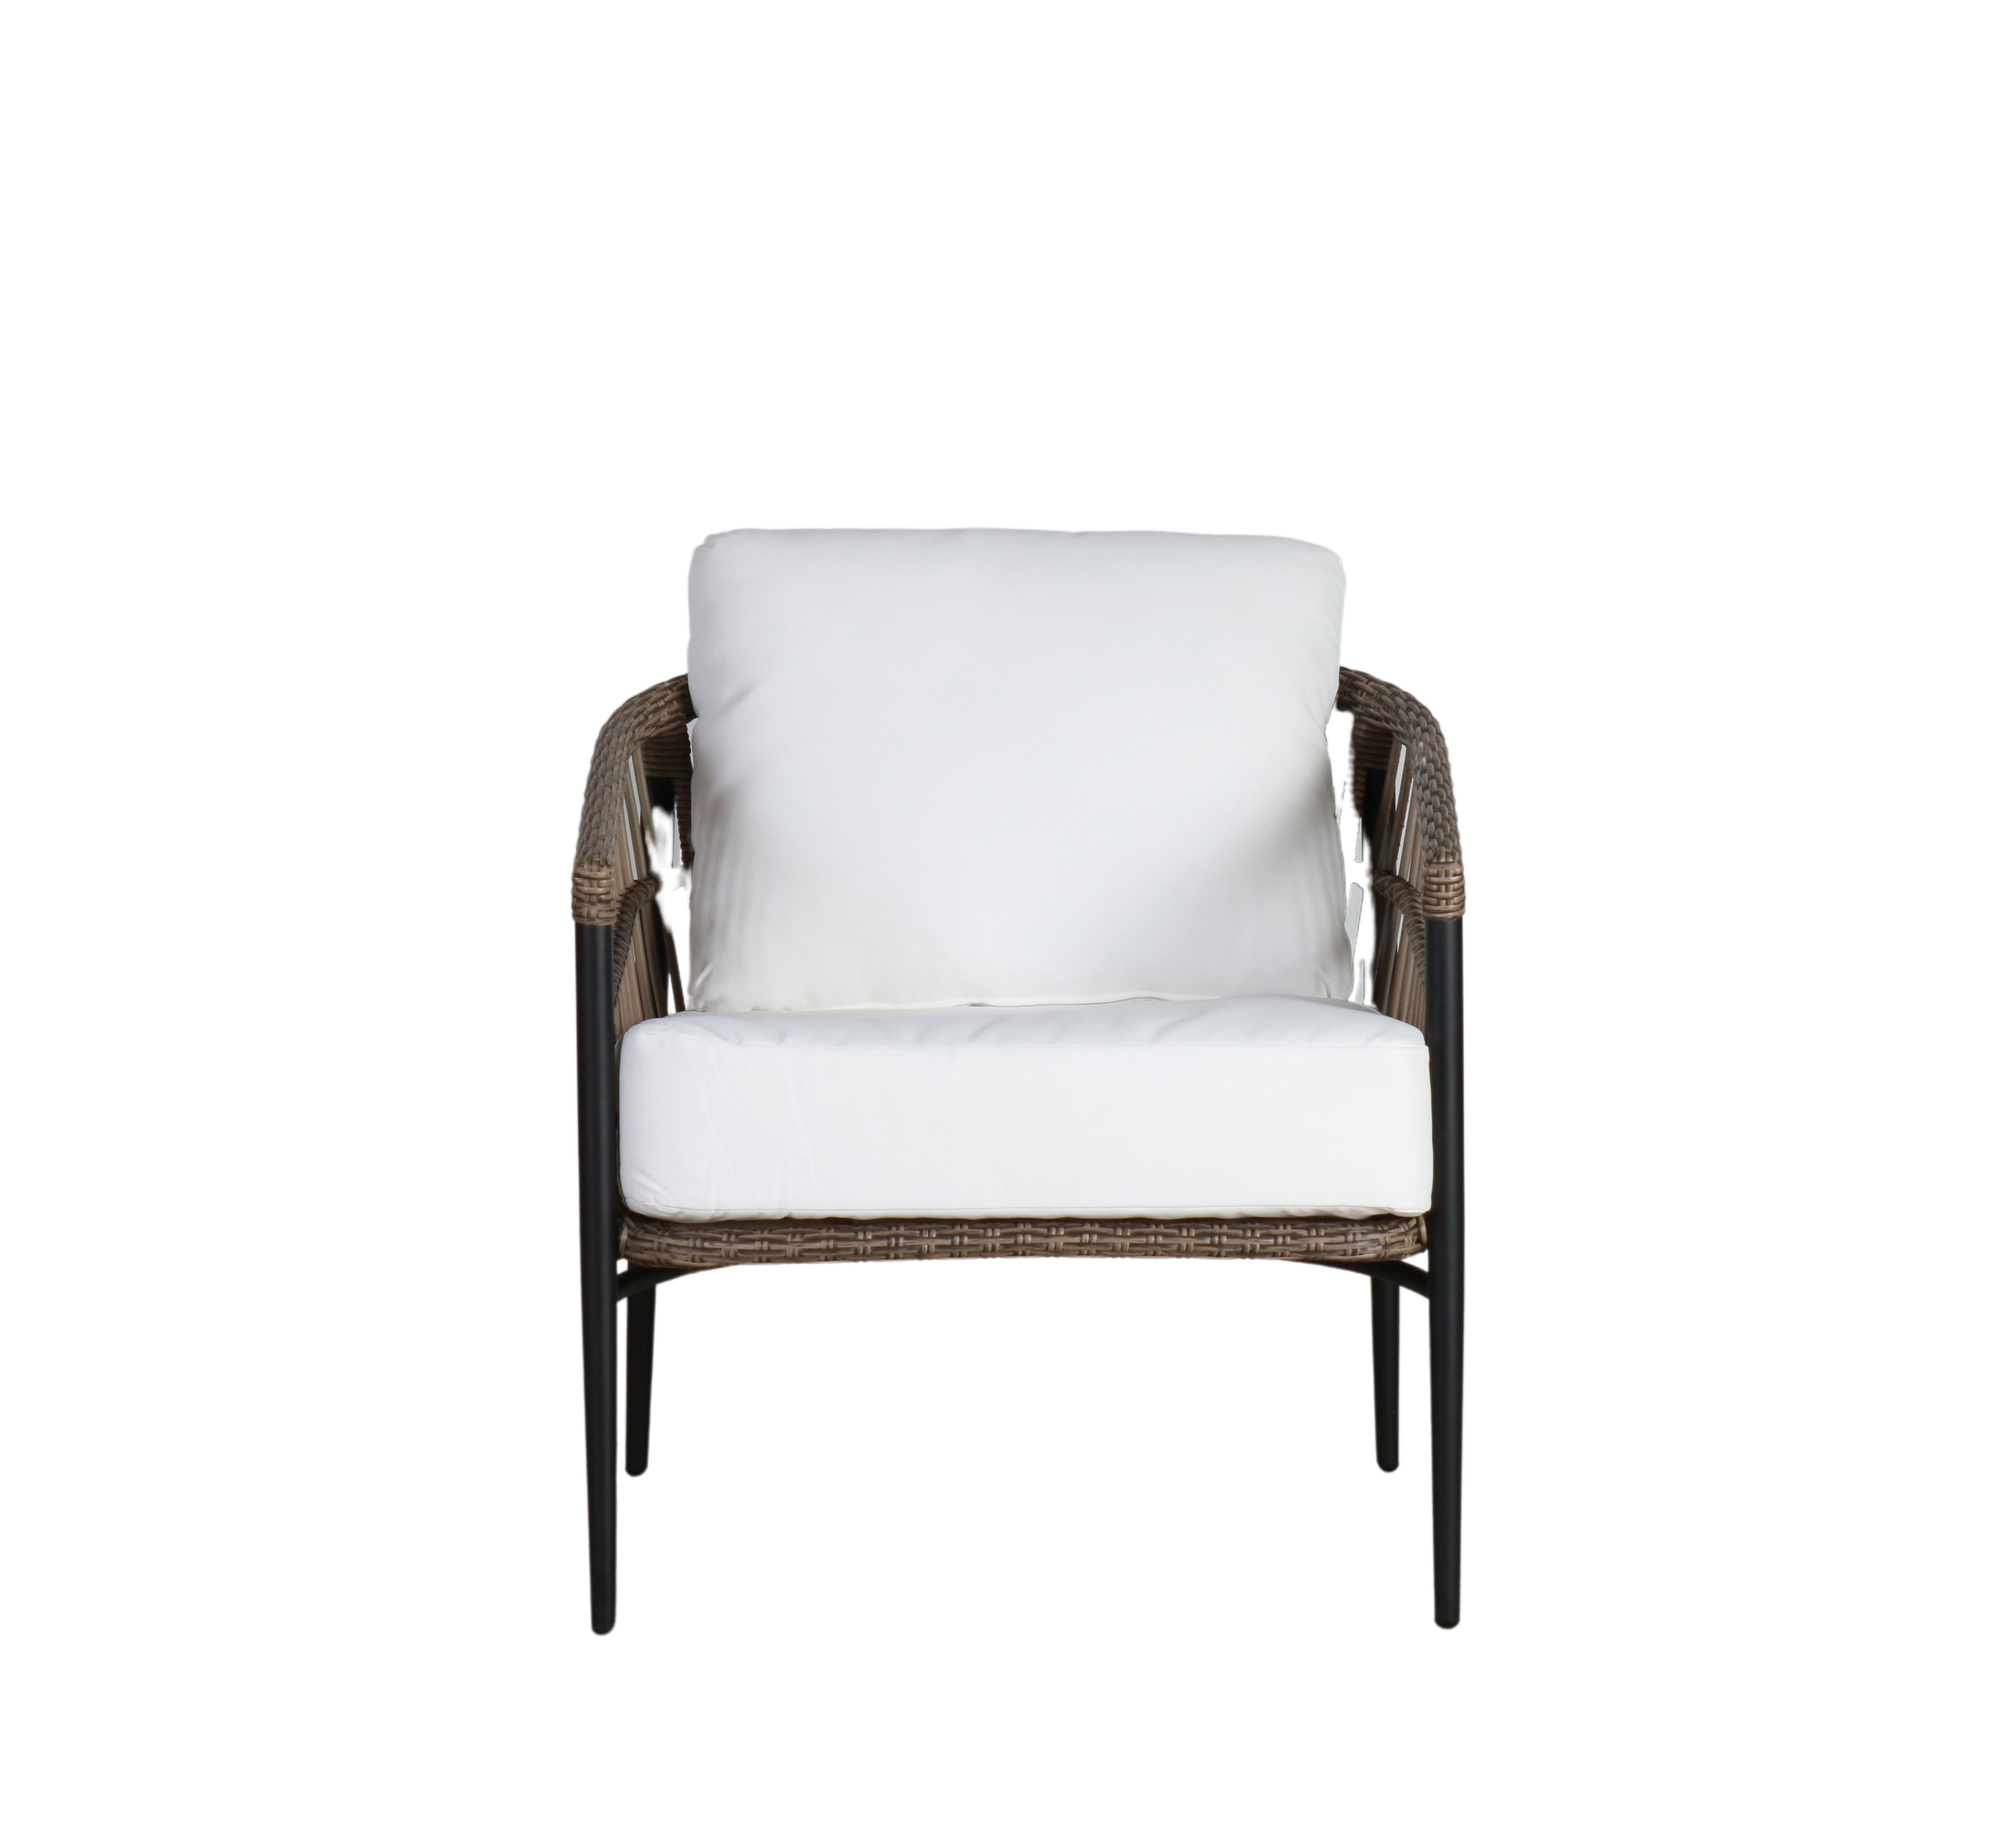 Outdoor armchair with seat and back cushion